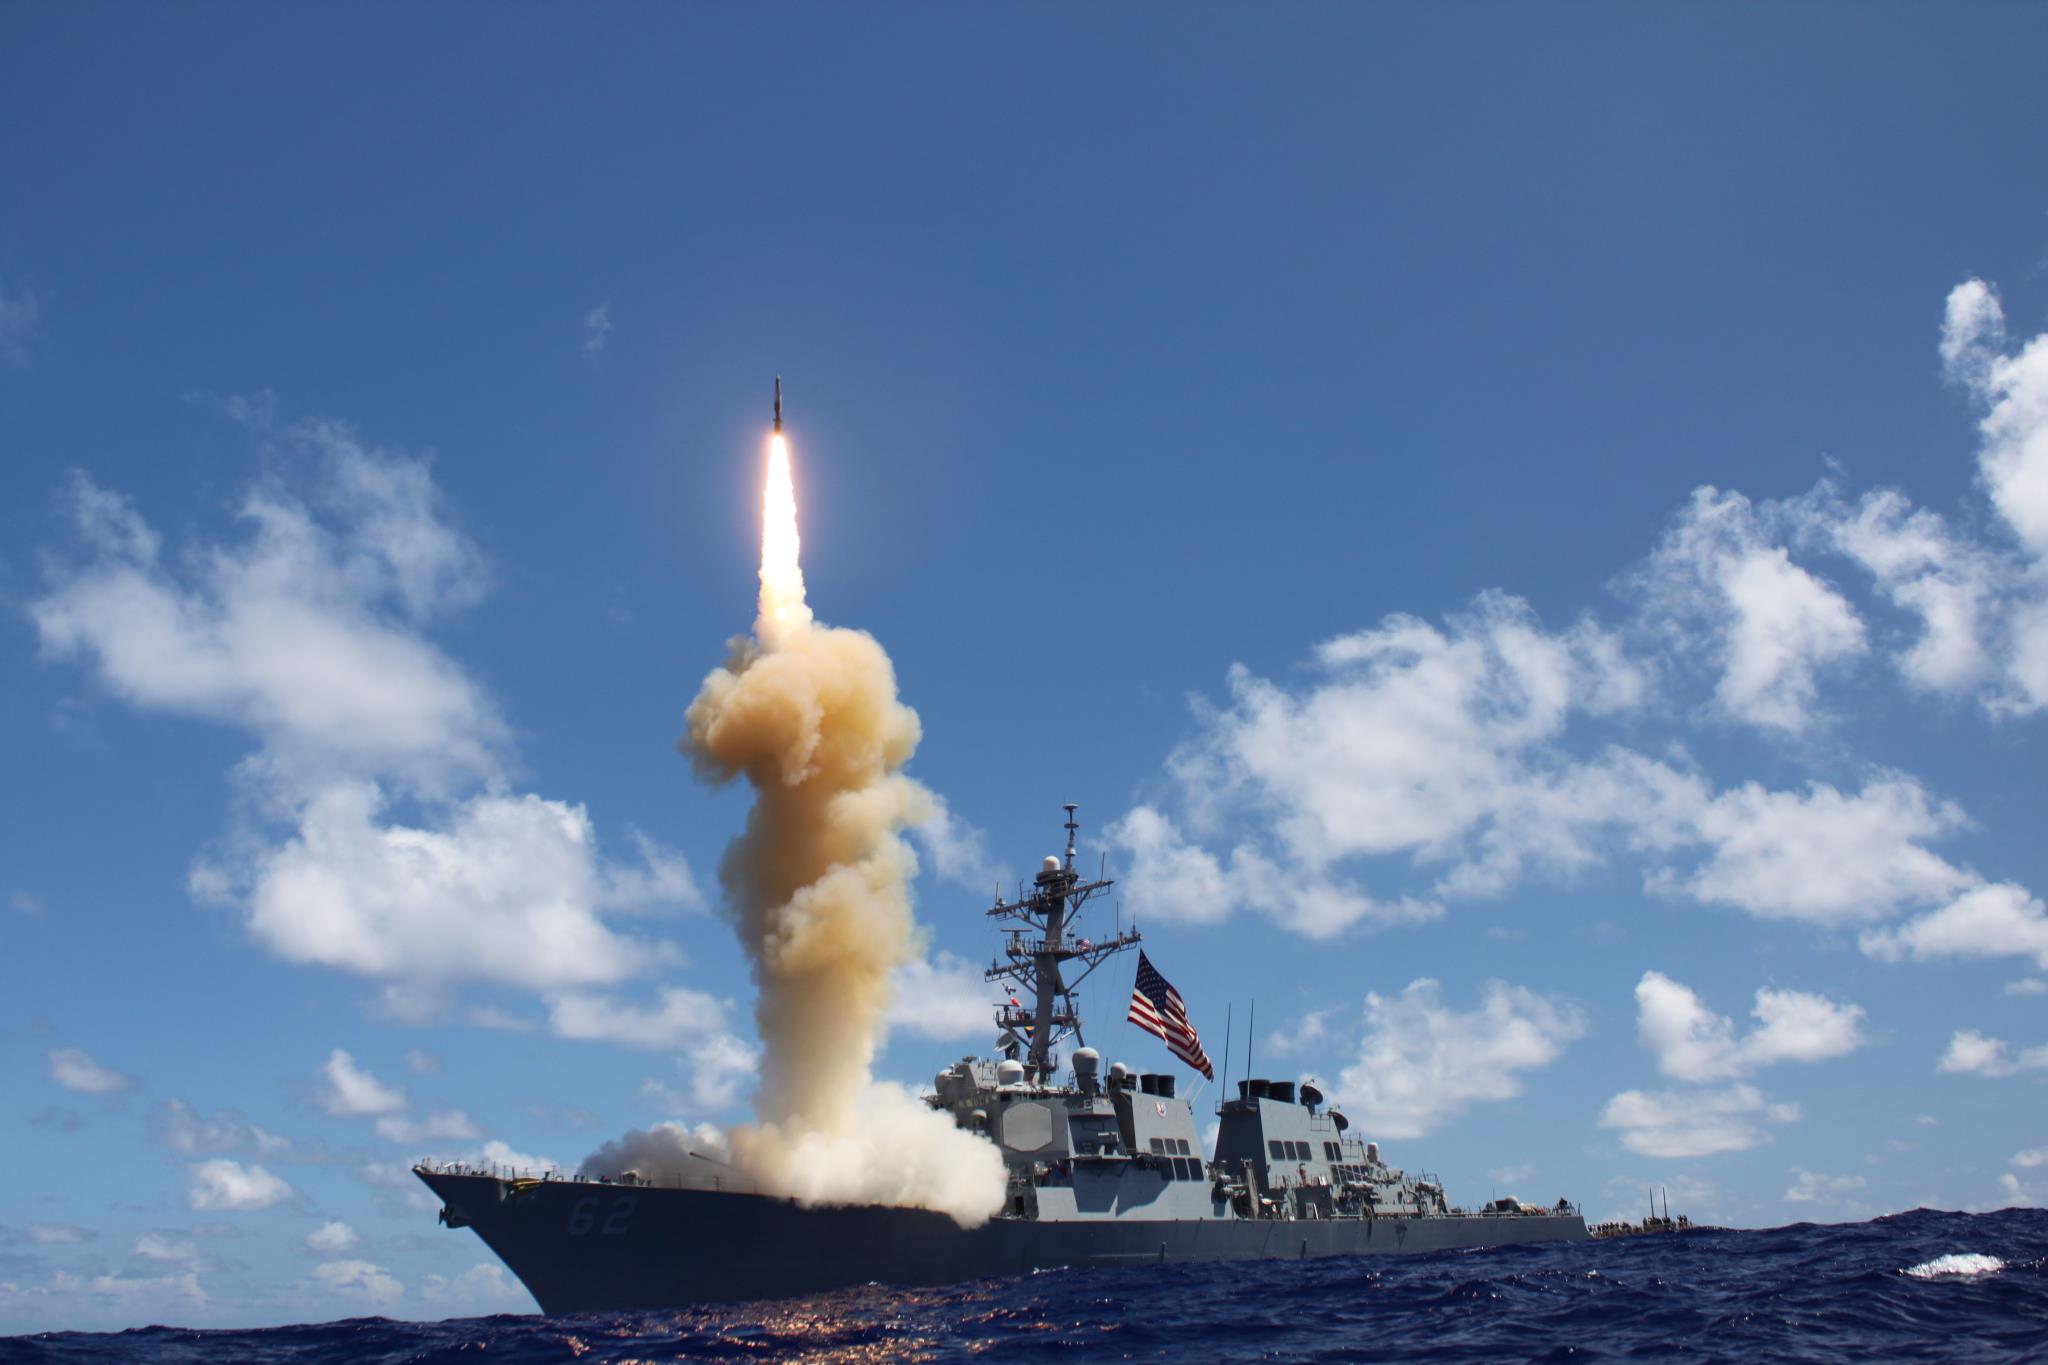 The guided-missile destroyer USS Fitzgerald (DDG 62) launches a Standard Missile-3 (SM-3) as apart of a joint ballistic missile defense exercise.